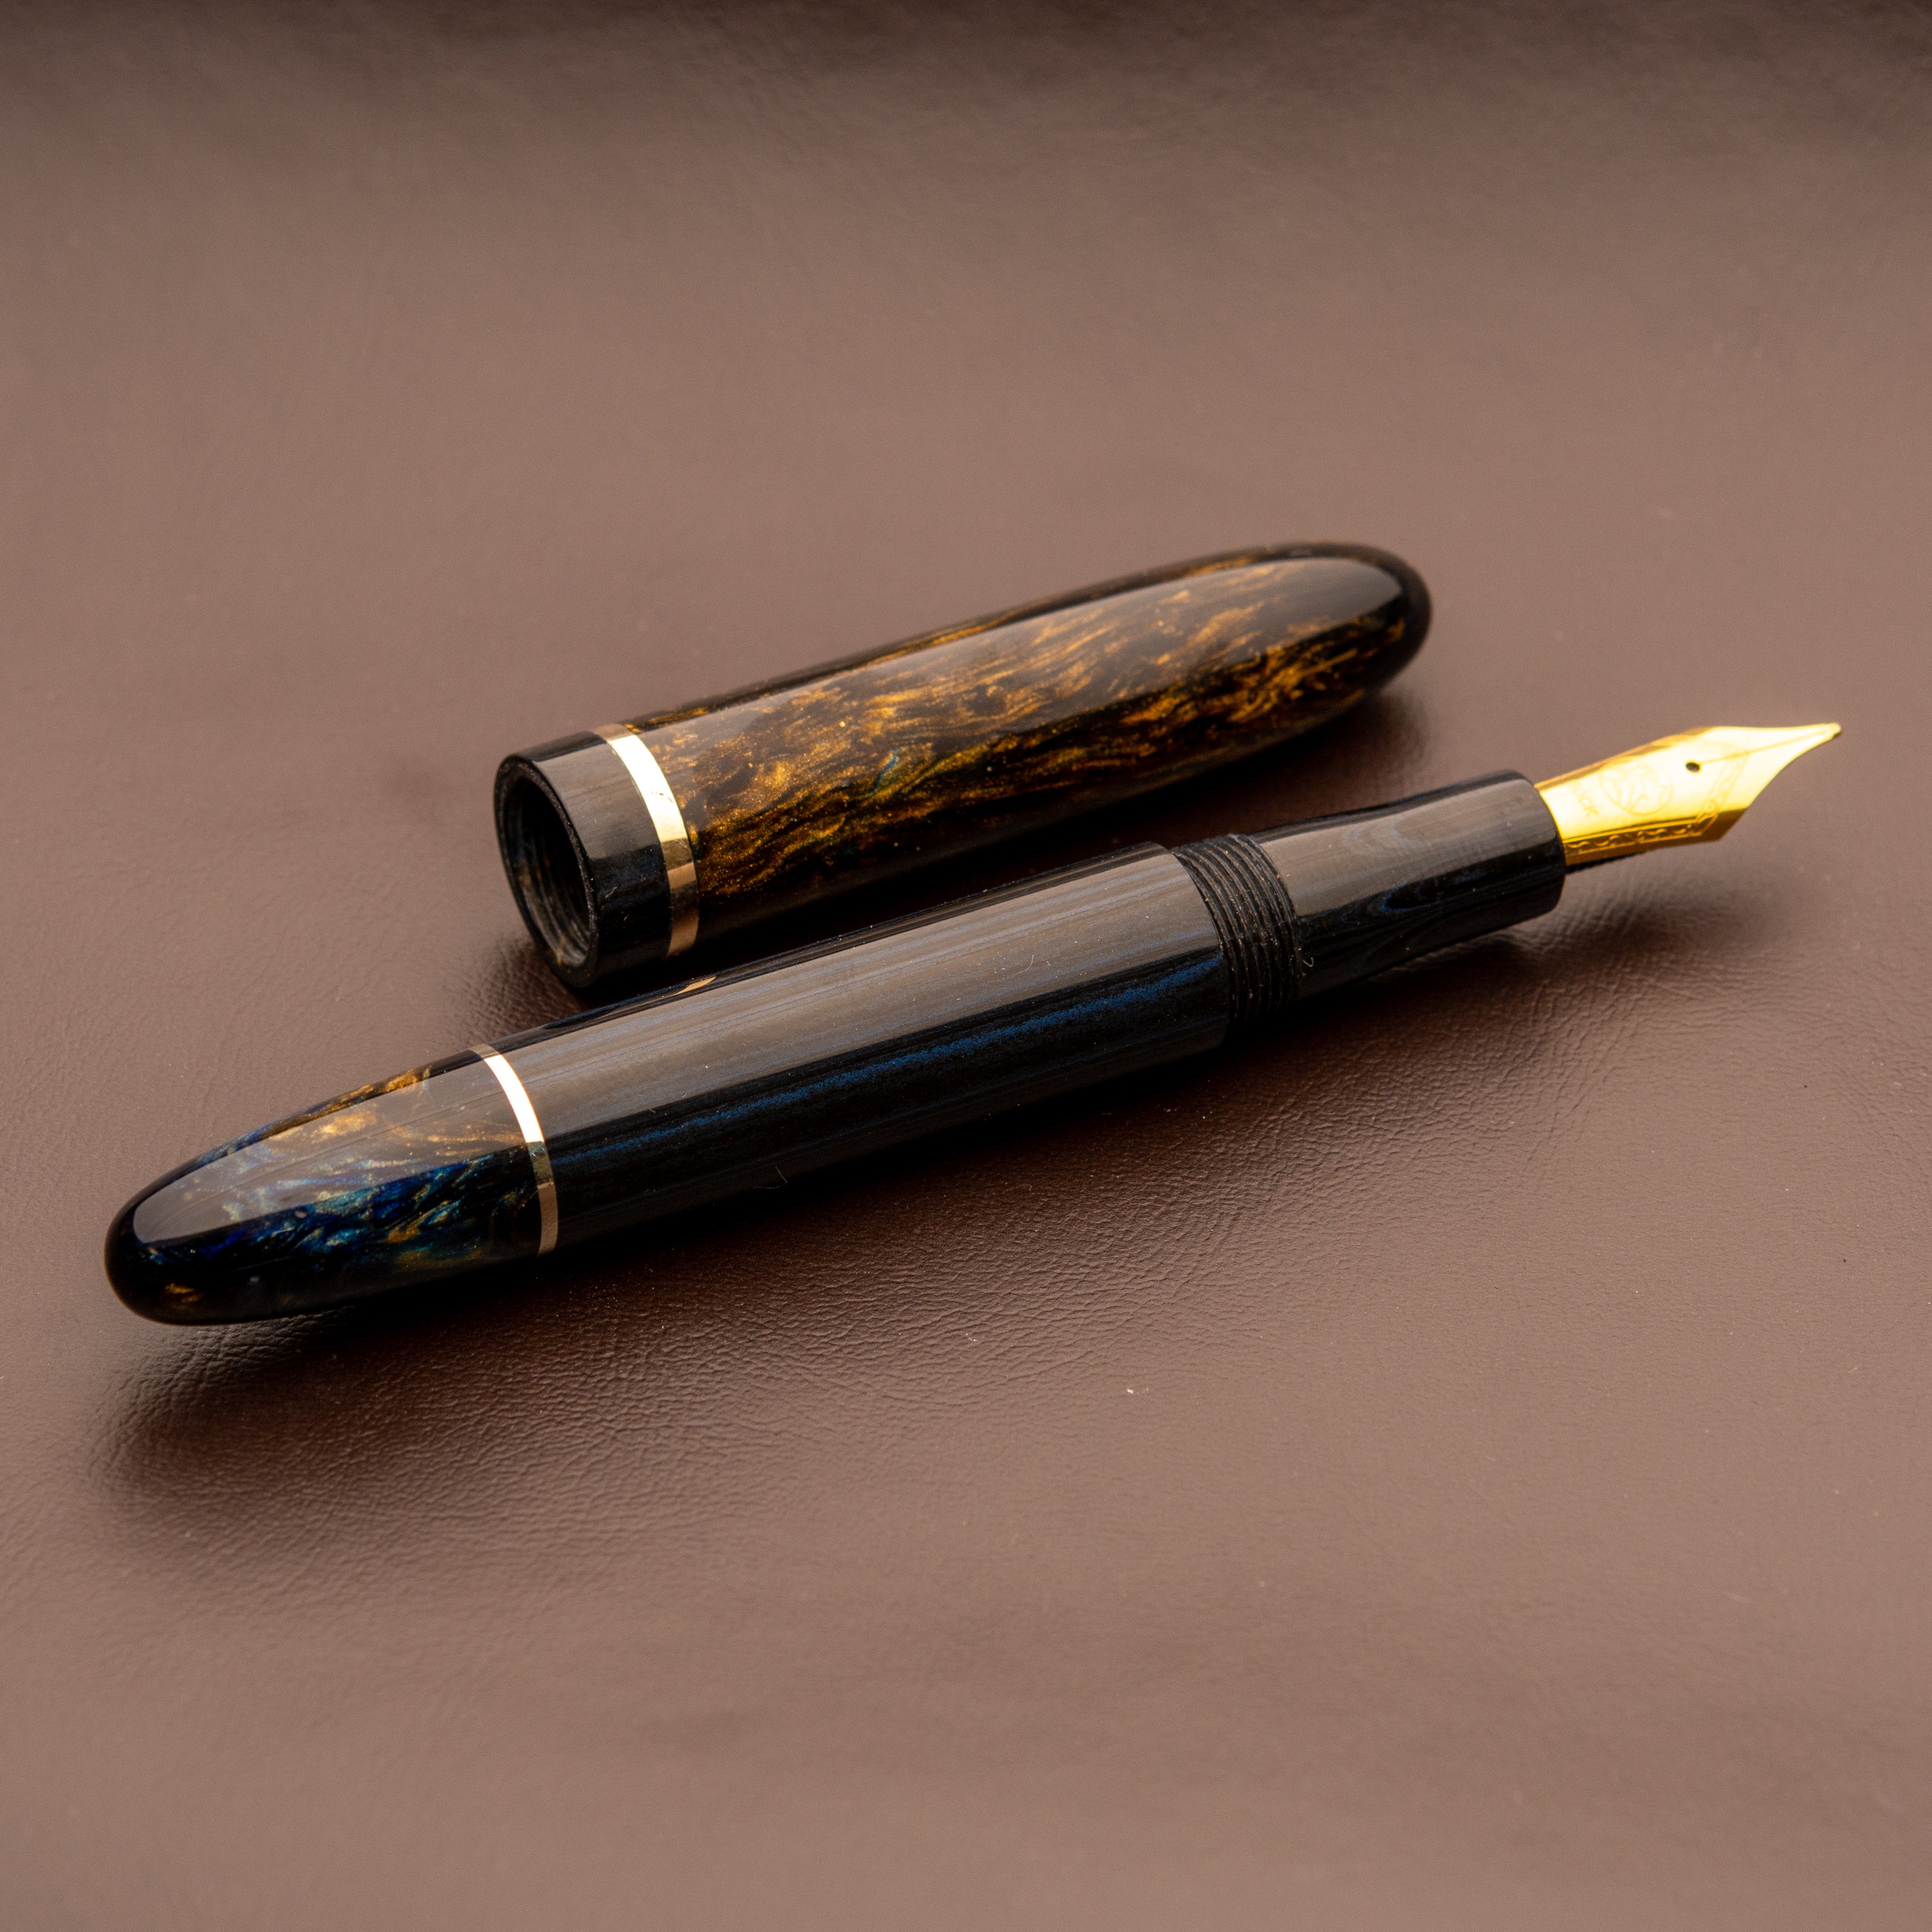 Fountain Pen - Bock #6 - 13 mm - SEM Denim Blue ebonite combined with an in-house cast